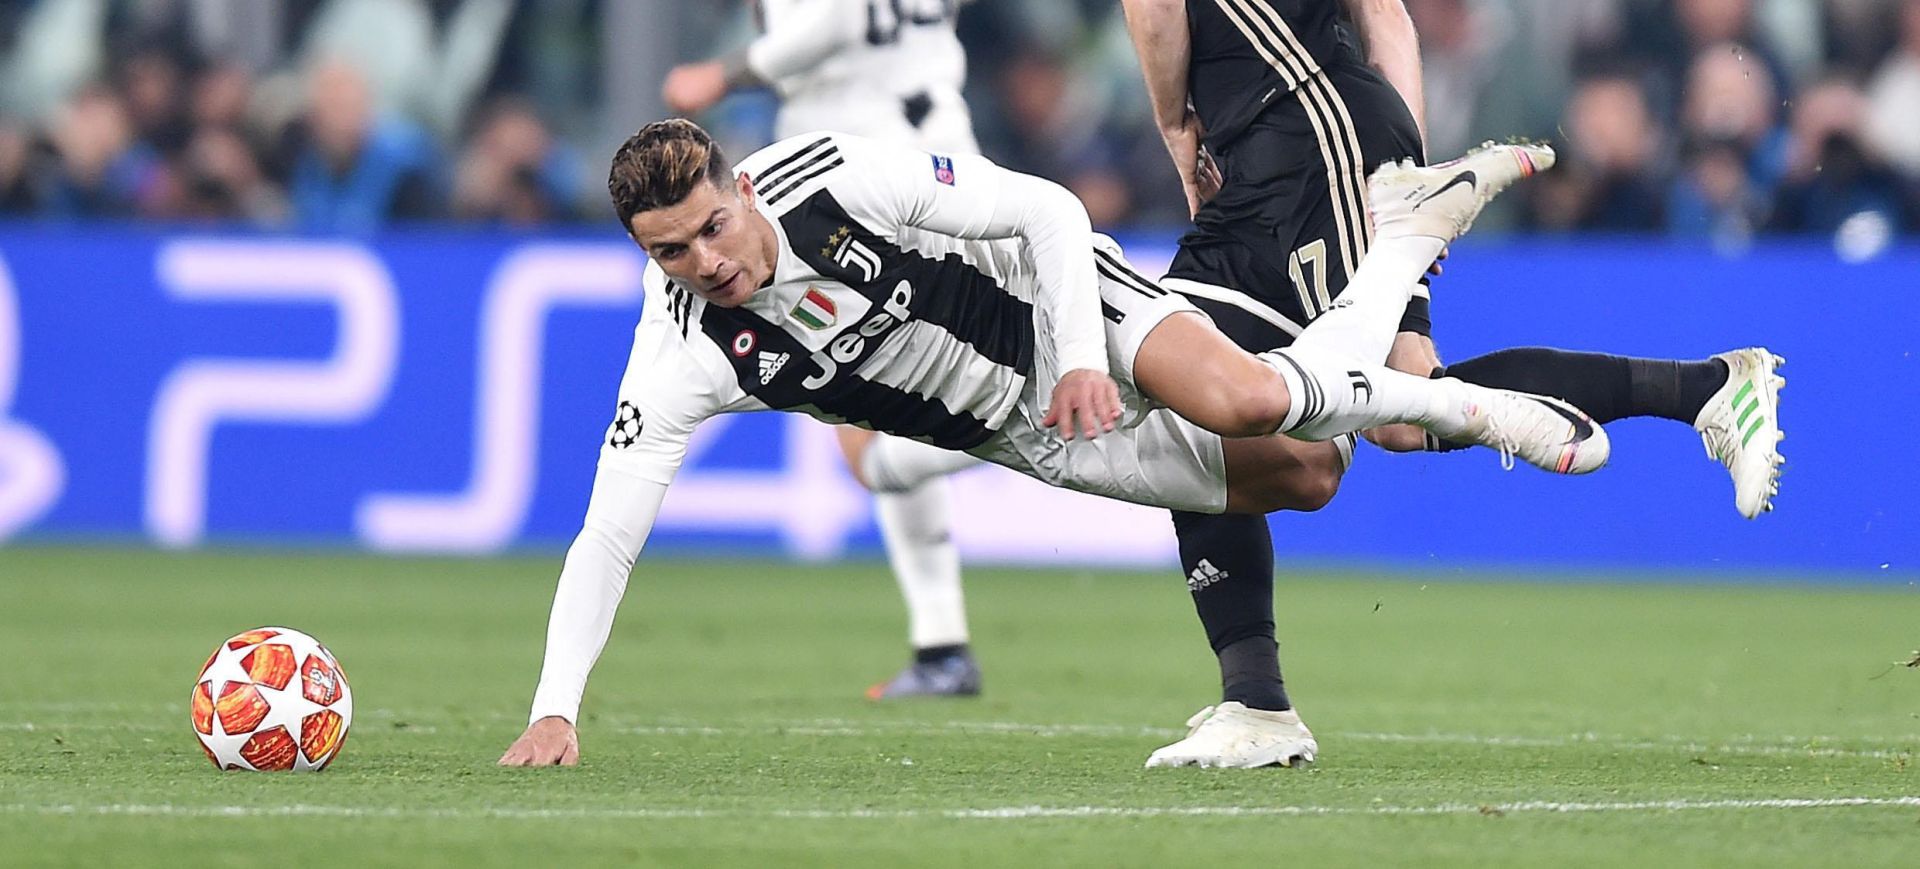 epa07511664 Juventus' Cristiano Ronaldo (L) in action during the UEFA Champions League quarter final, second leg, soccer match between Juventus FC and Ajax Amsterdam in Turin, Italy, 16 April 2019.  EPA/ALESSANDRO DI MARCO